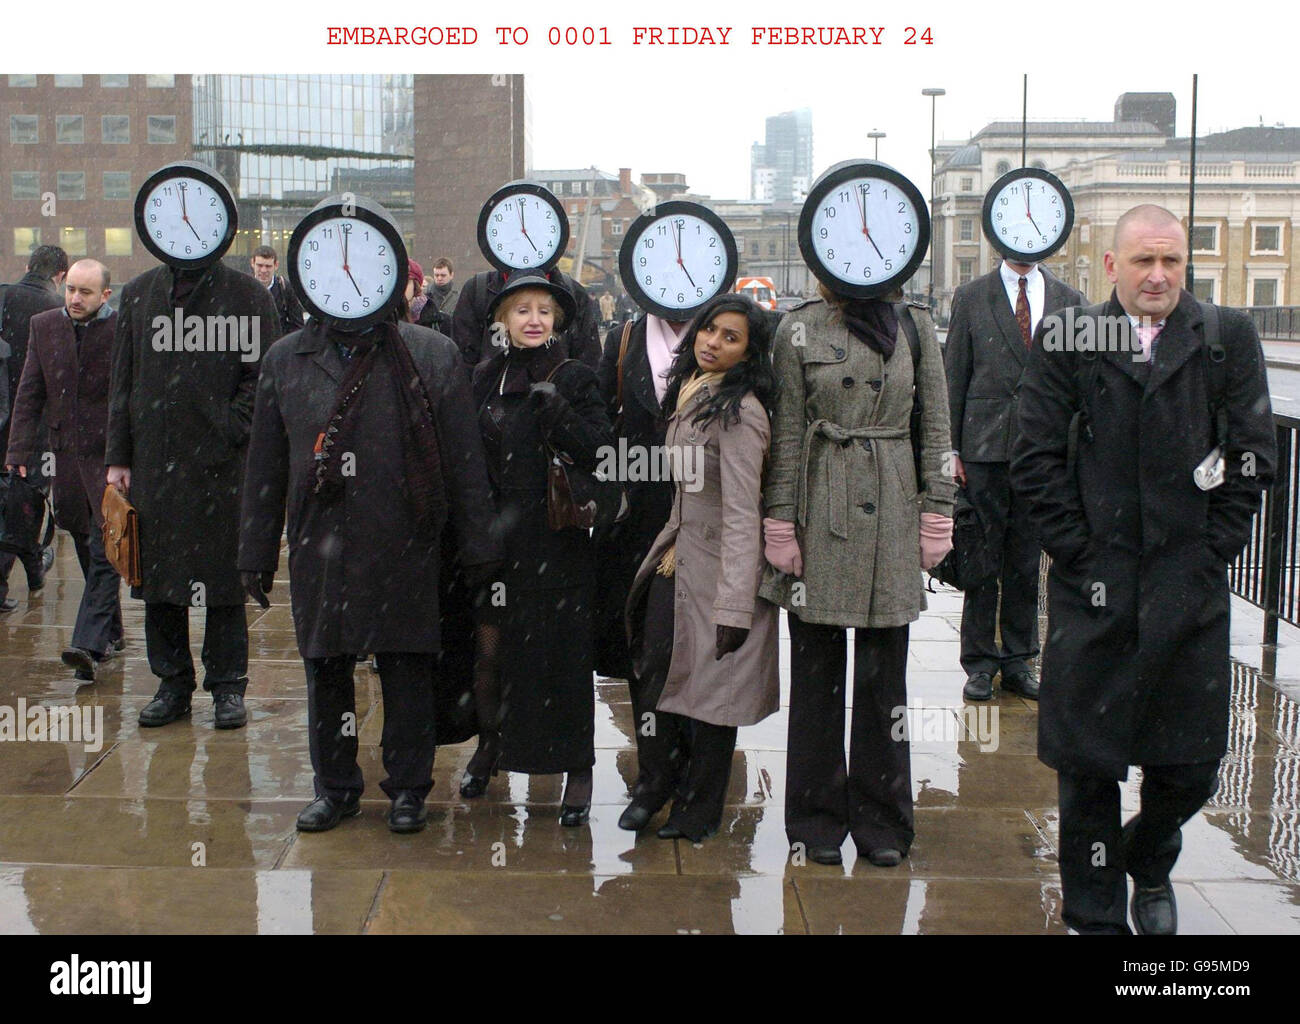 The Trade Union Congress (TUC) organise a stunt portraying commuters, some of whom are wearing clock-faces as masks with the time set at 5pm, walking across London Bridge in London, Thursday February 23, 2006. The stunt comes ahead of tomorrow's 'Work Your Proper Hours Day' when workers are being encouraged to arrive at work on time, take a proper lunch break and leave when they are meant to. PRESS ASSOCIATION Photo. Photo credit should read: Johnny Green/PA. Stock Photo